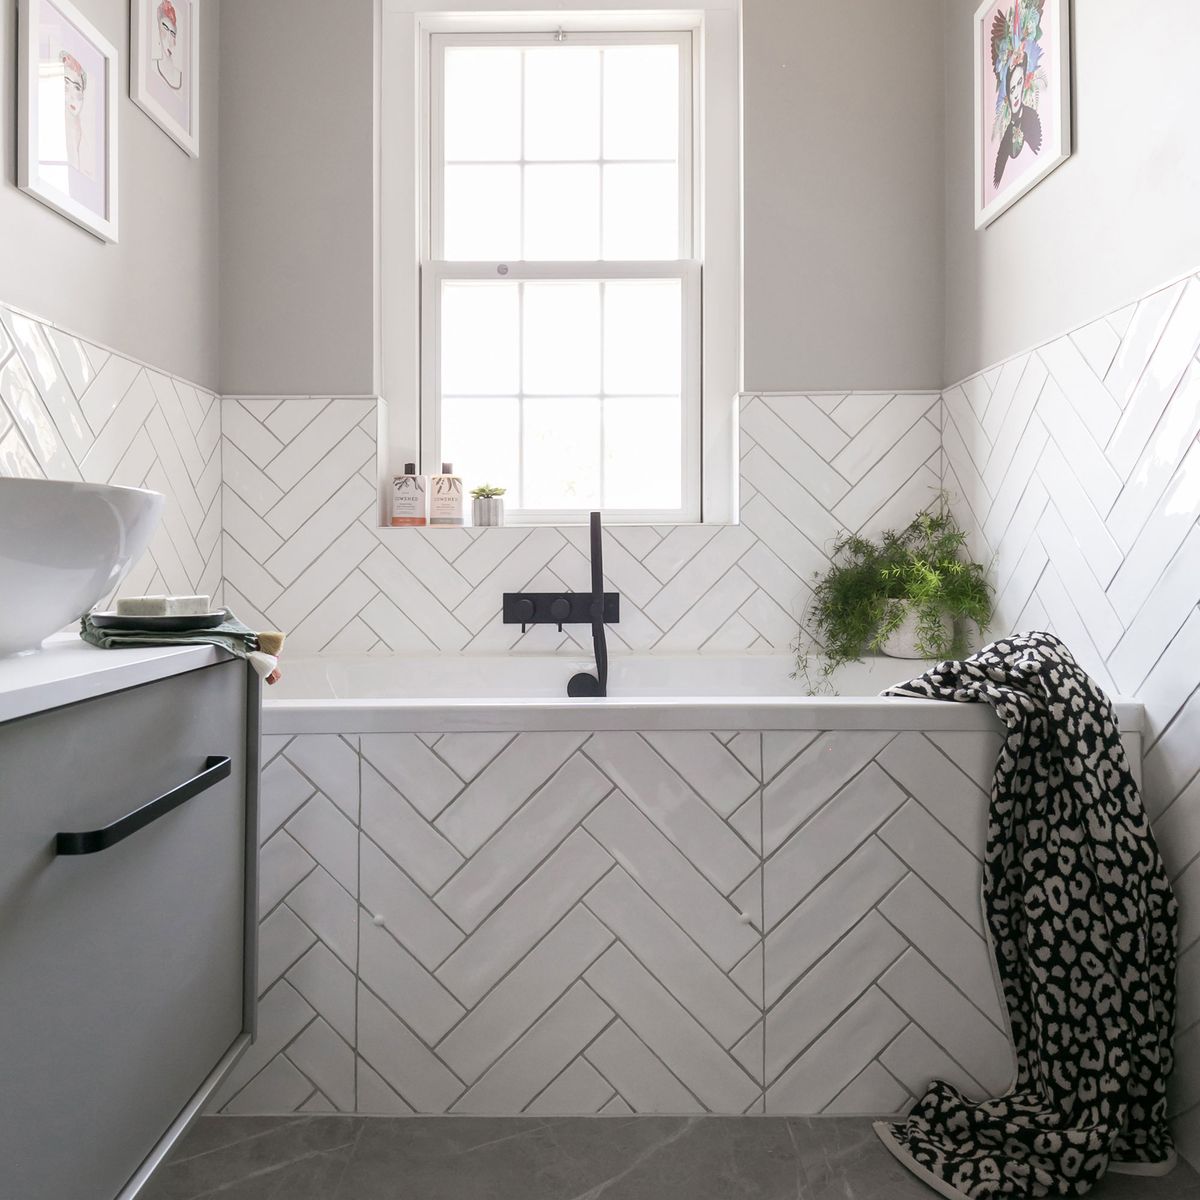 33 small bathroom ideas to make a style statement